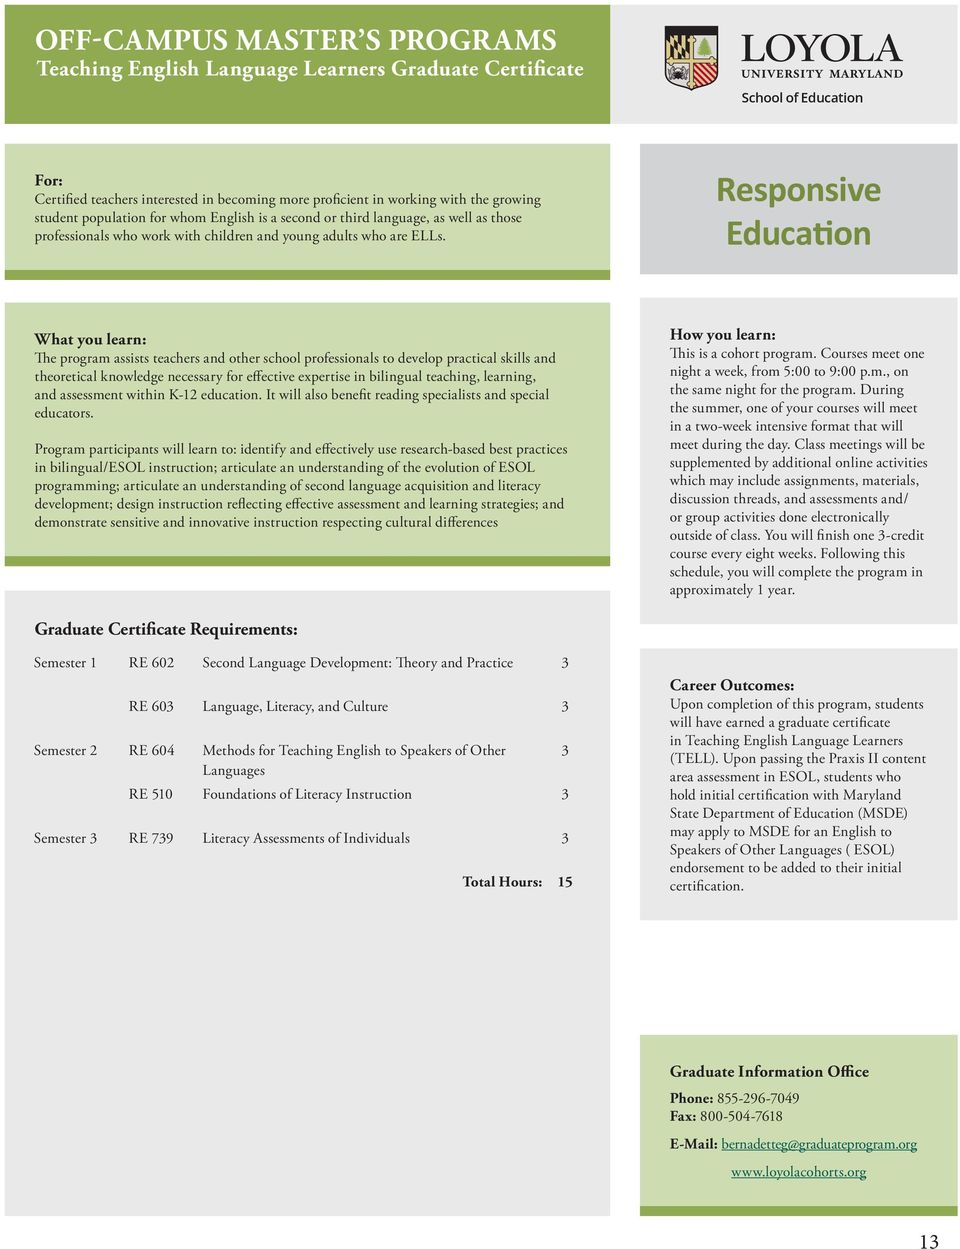 Responsive Education The program assists teachers and other school professionals to develop practical skills and theoretical knowledge necessary for effective expertise in bilingual teaching,